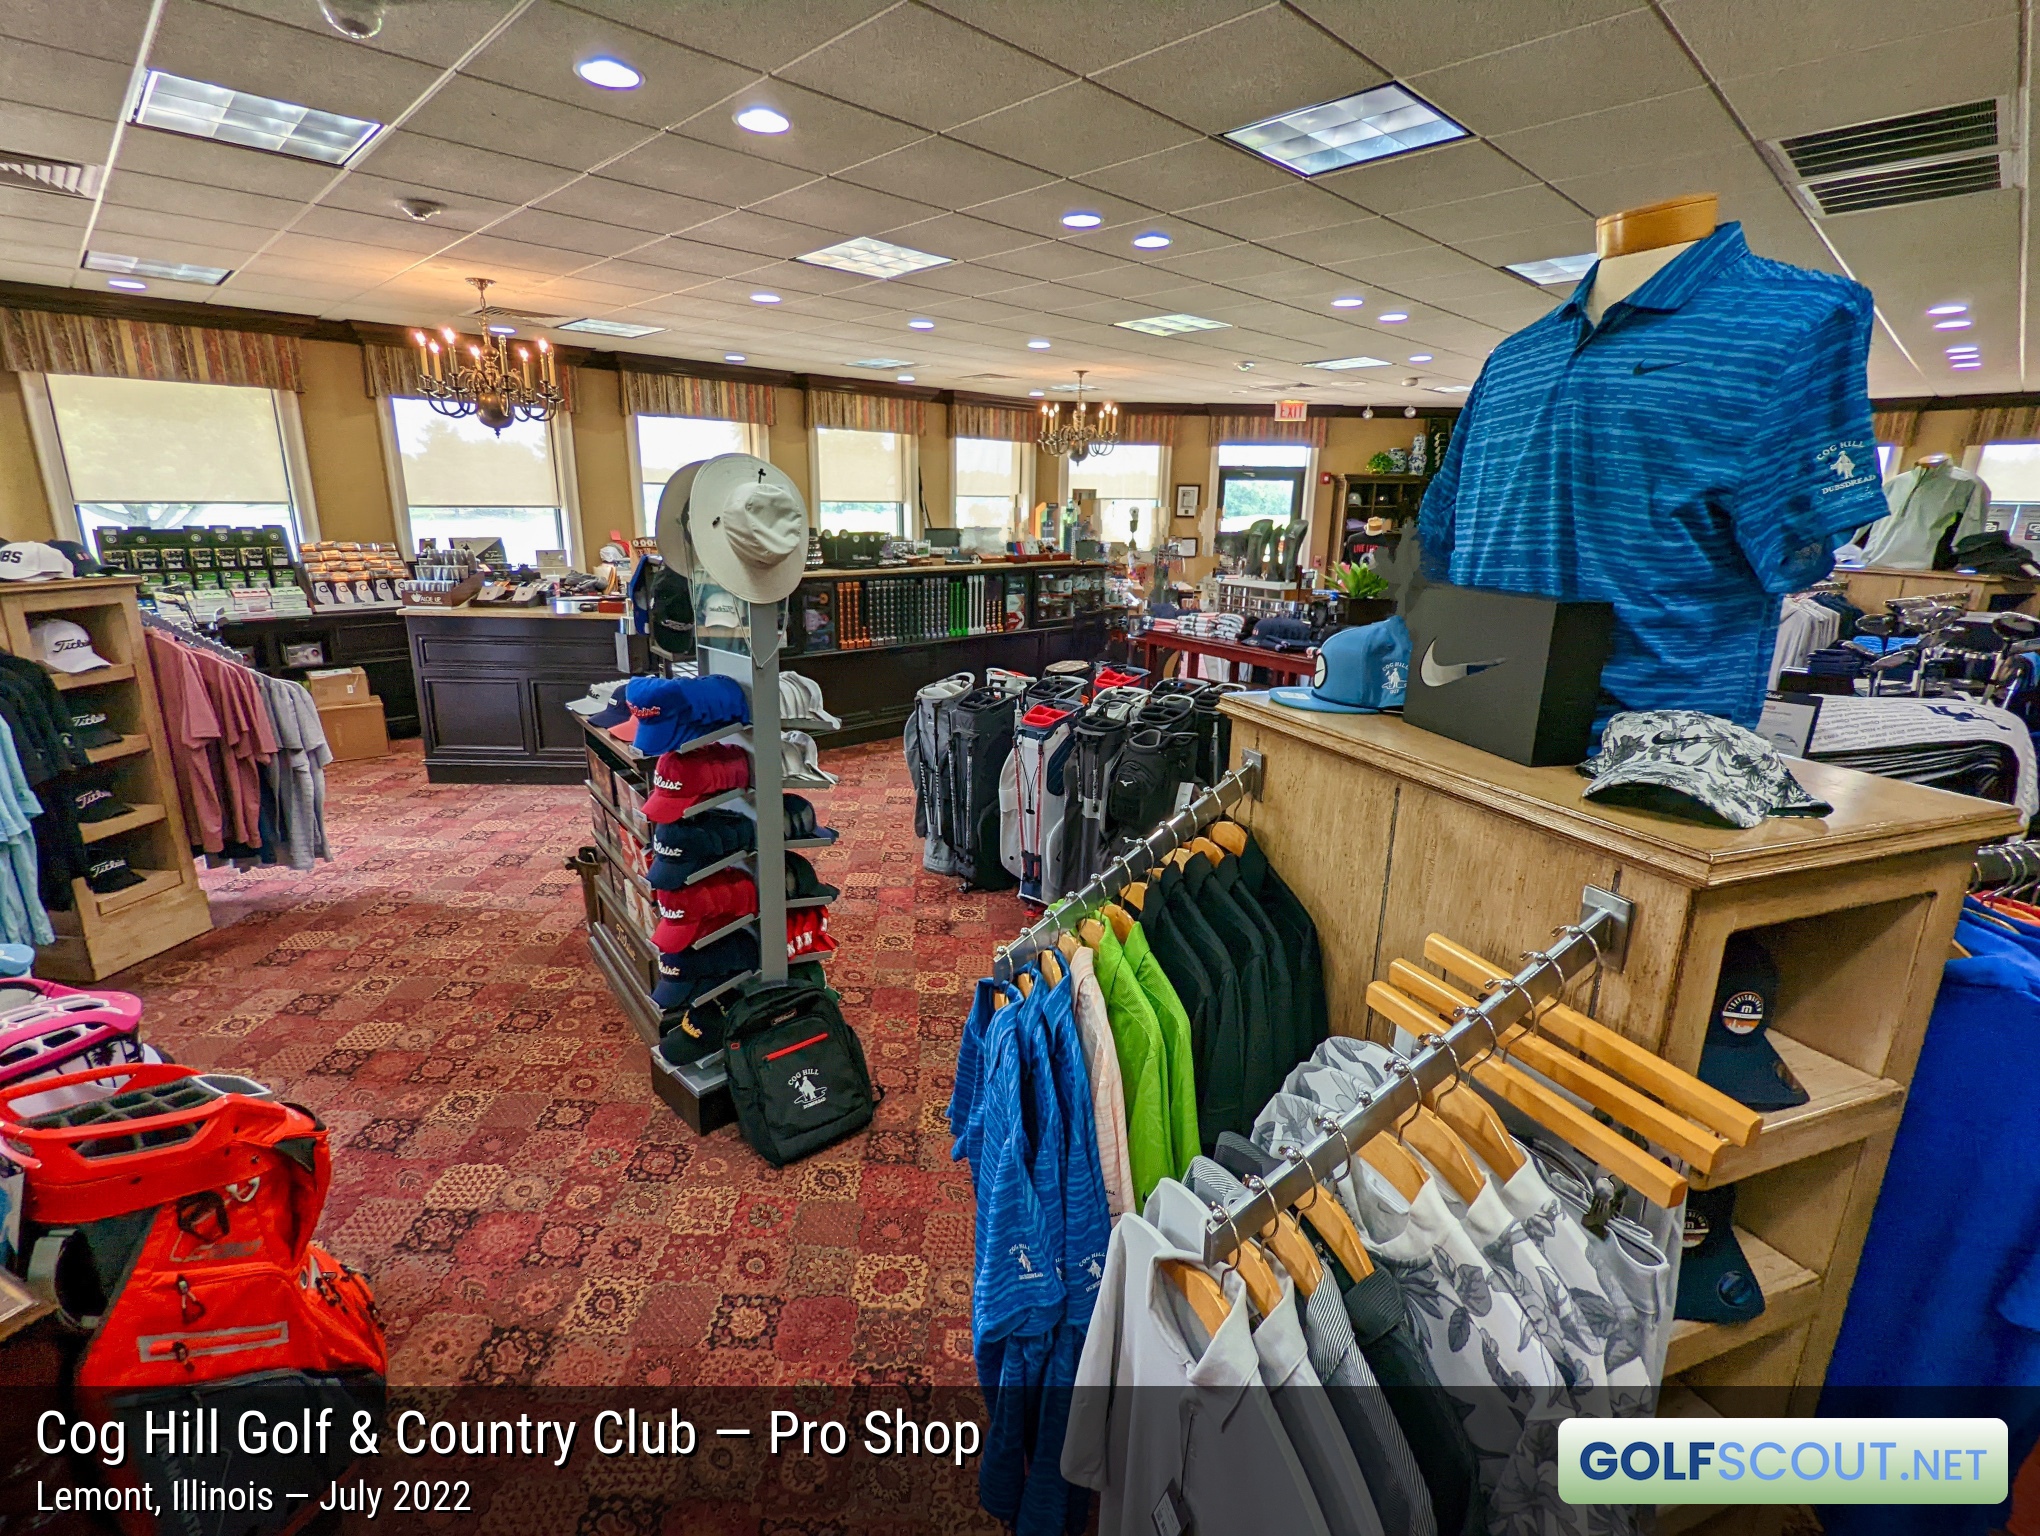 Photo of the pro shop at Cog Hill Course #2 - Ravines in Lemont, Illinois. The pro shop  in the building for courses 2 and 4 is the largest pro shop on the property.